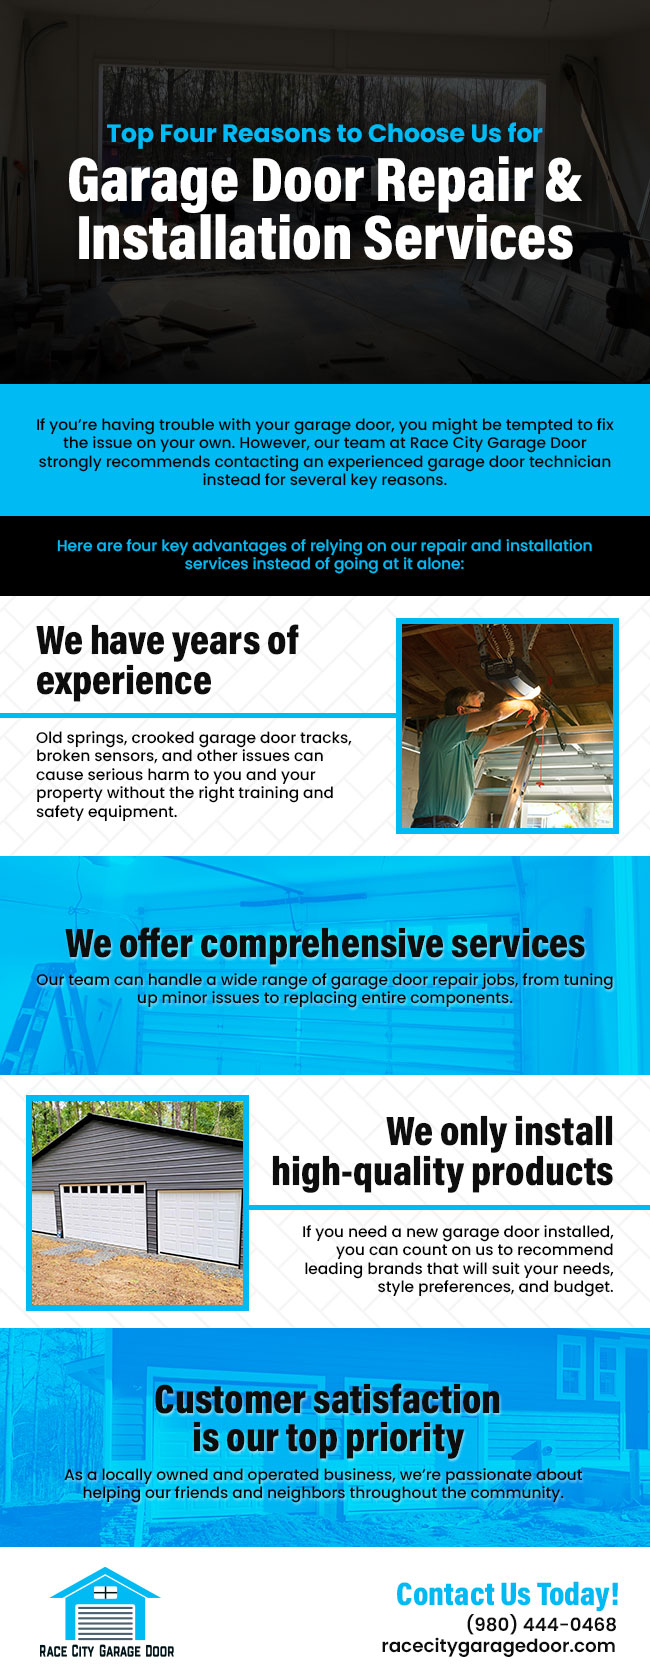 Top Four Reasons to Choose Us for Garage Door Repair & Installation Services